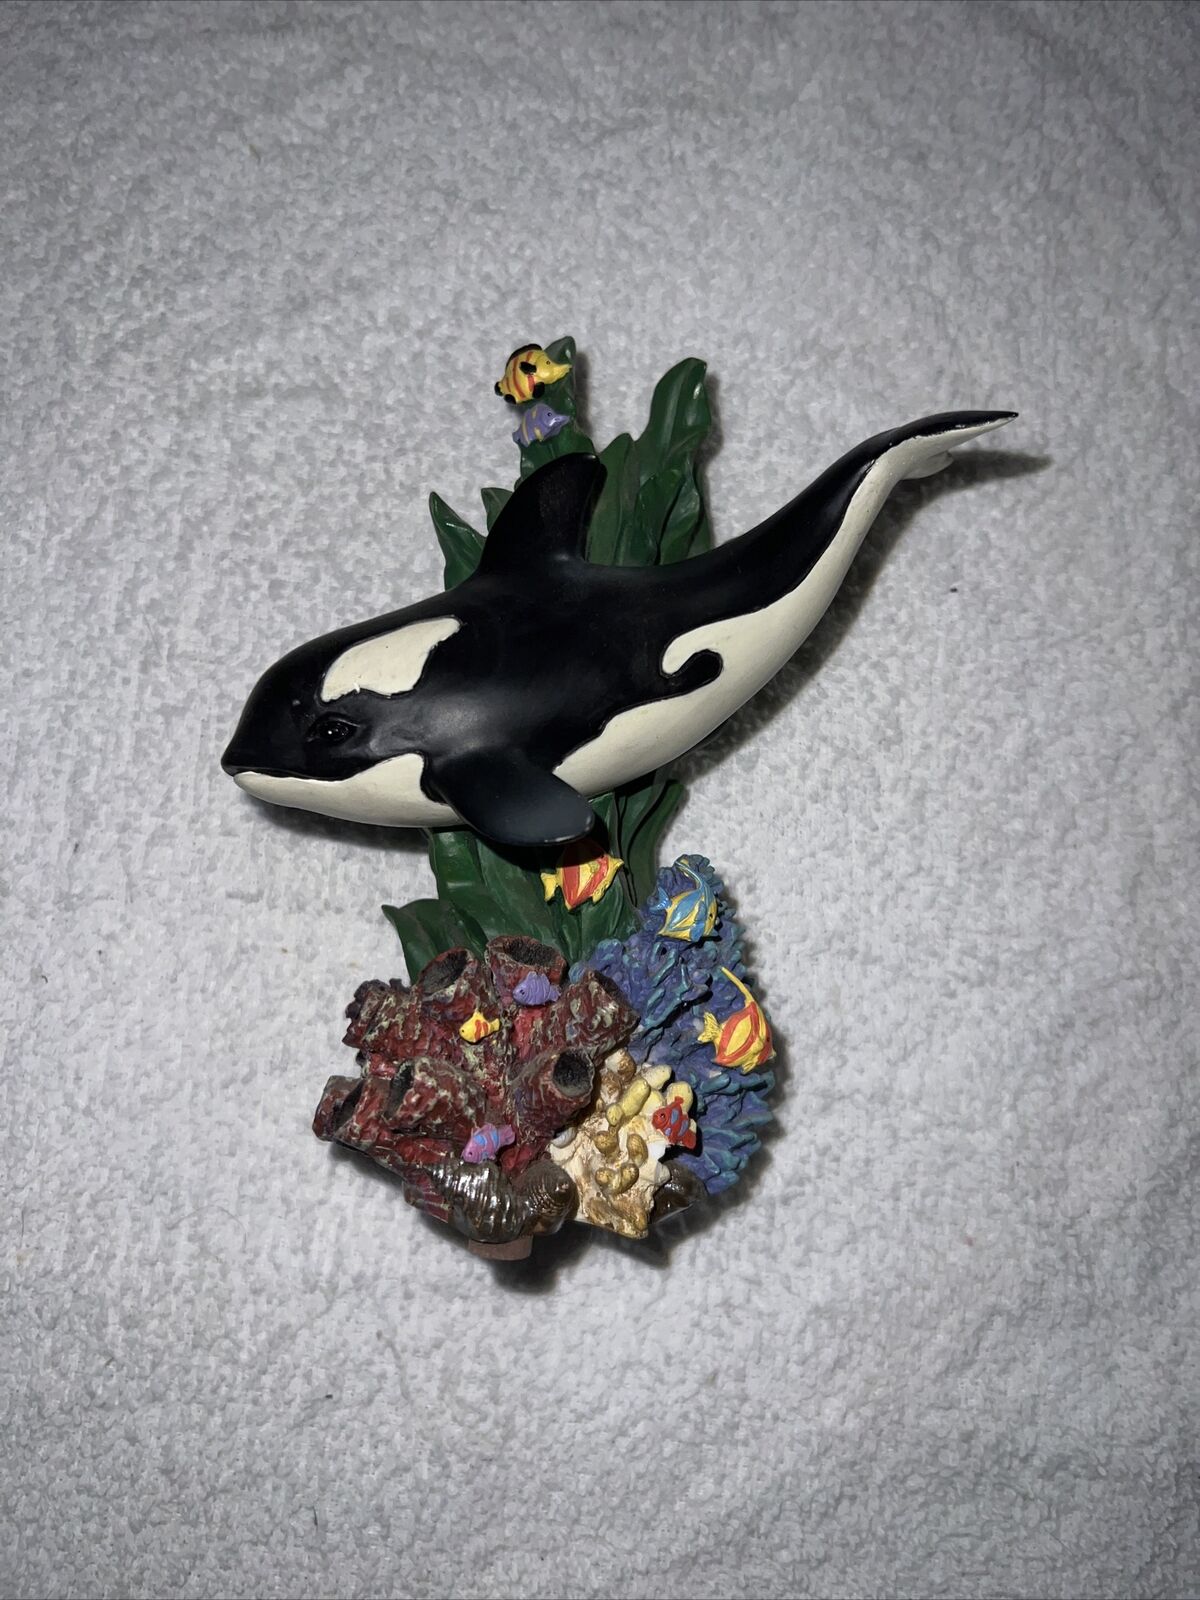 sea world extinction is forever collectable figurine orca whale